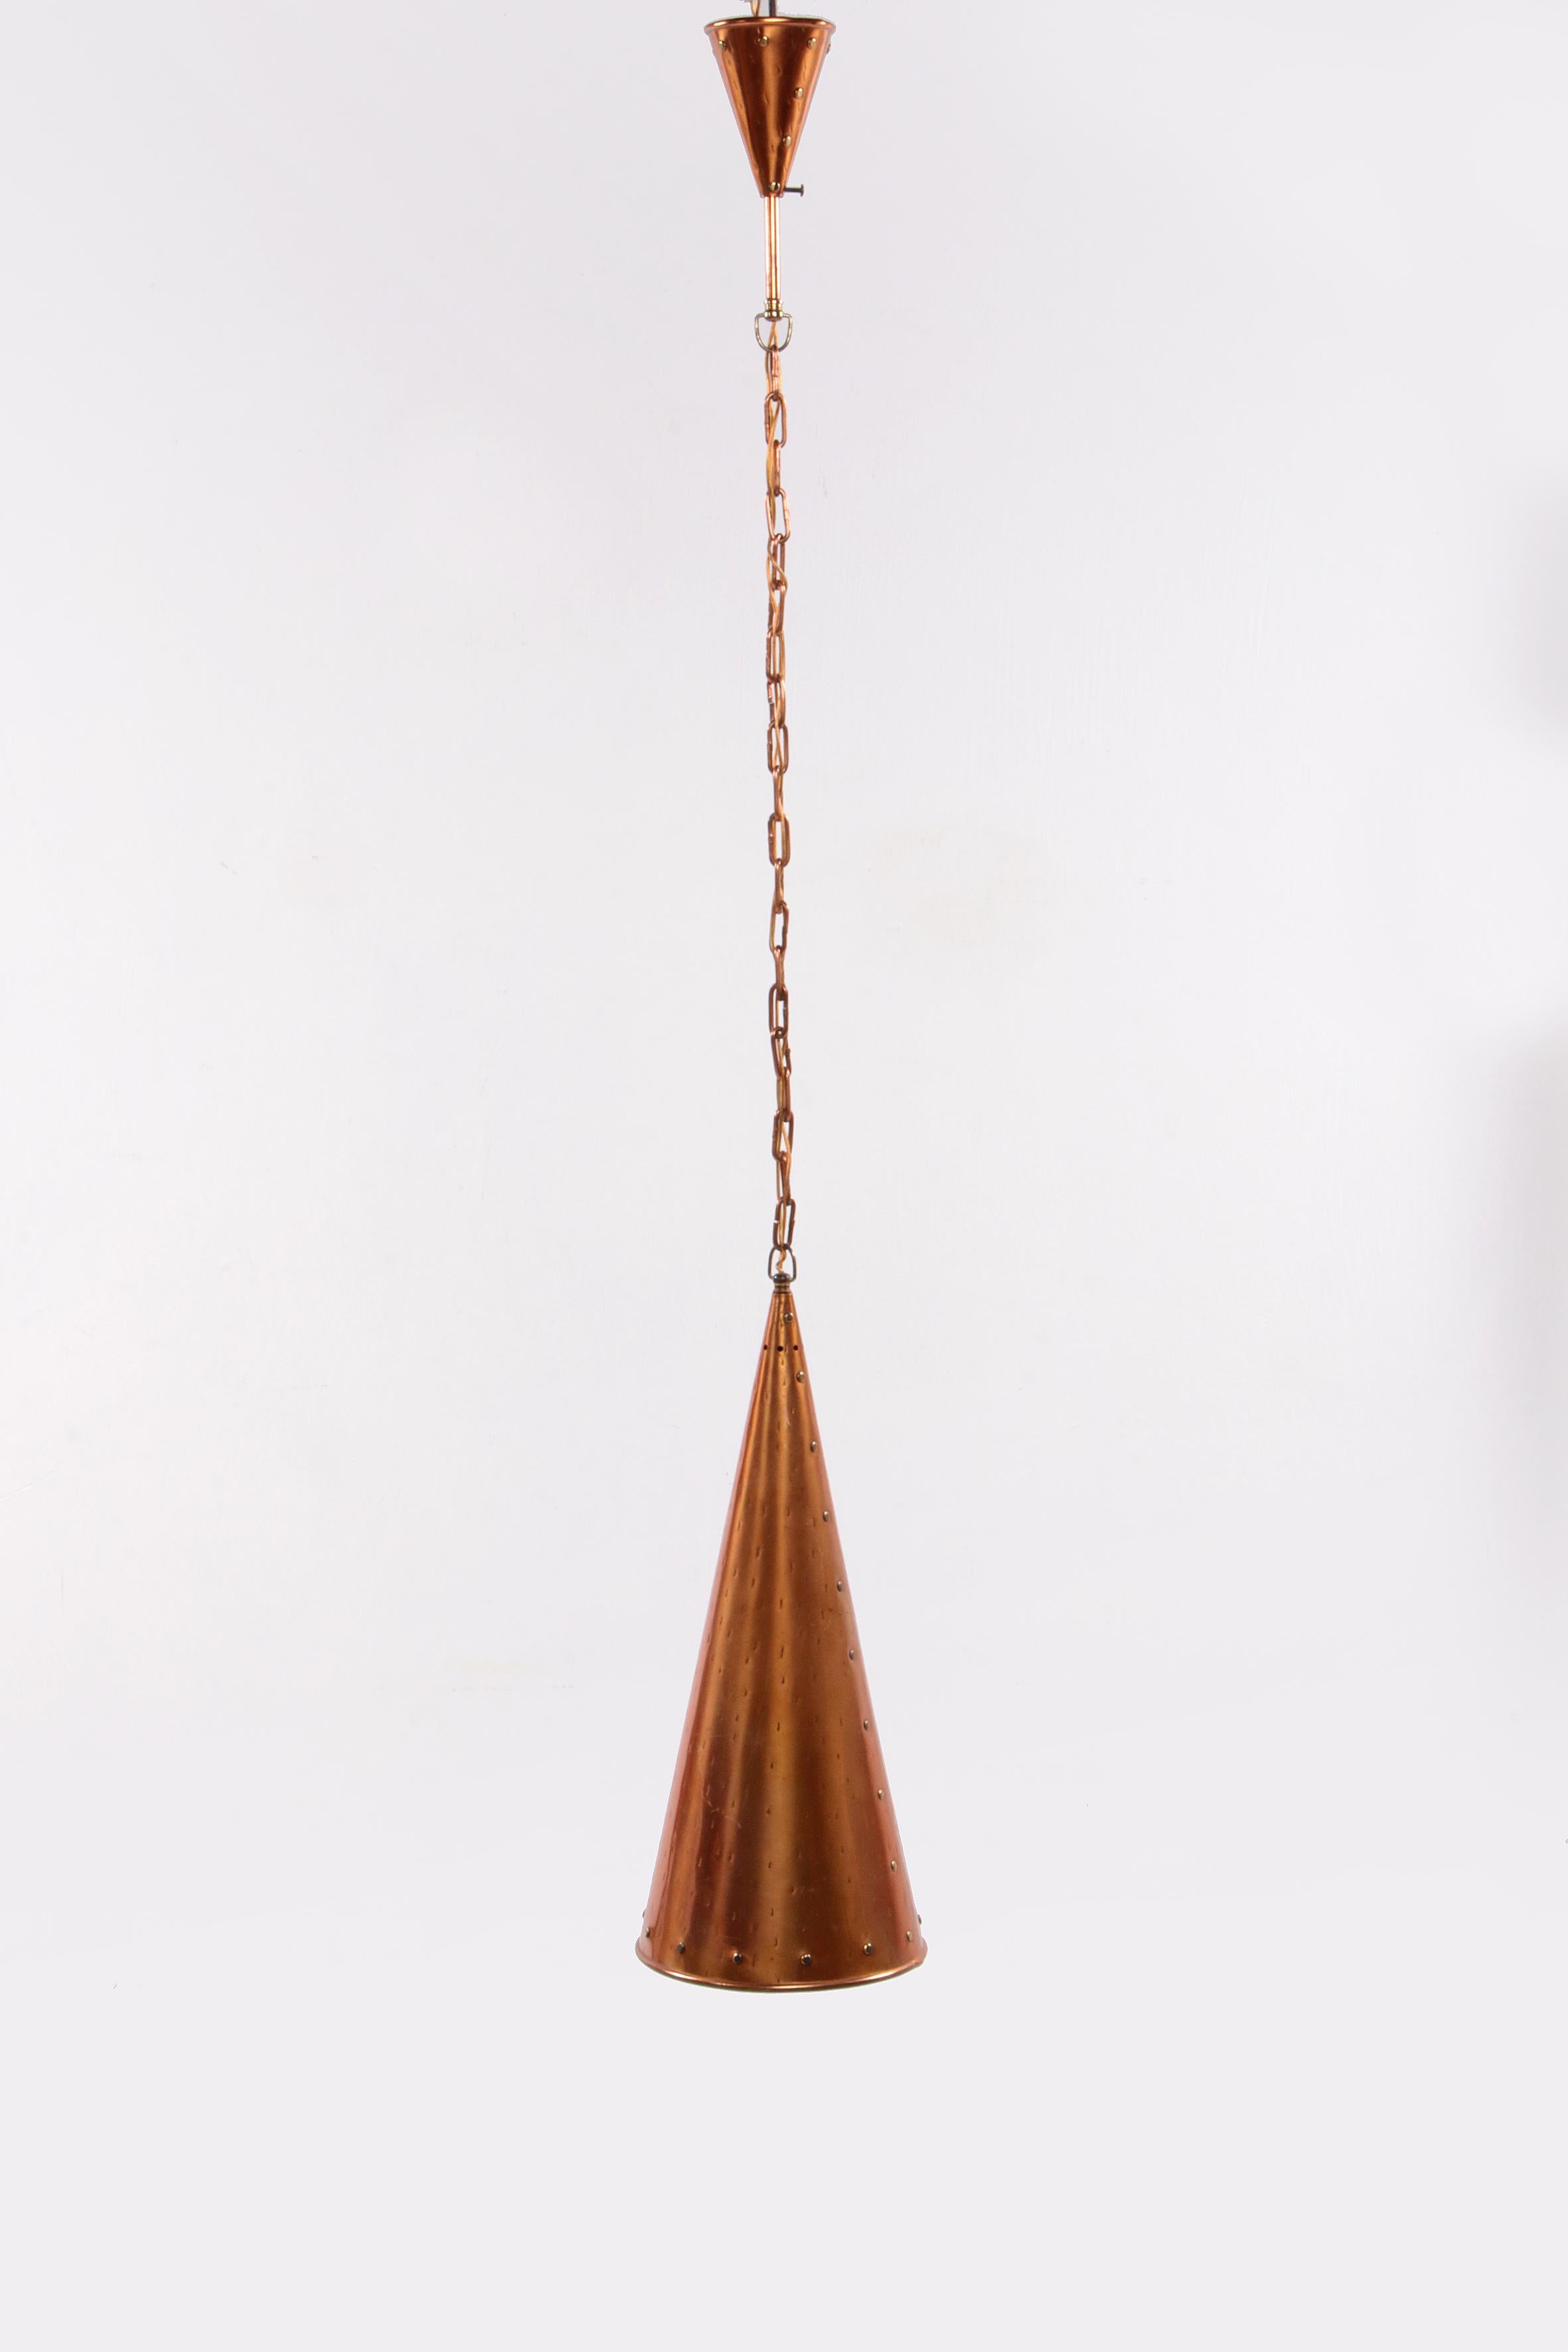 Danish hand-hammered copper hanging lamp by E.S Horn Aalestrup, 1950s For Sale 2